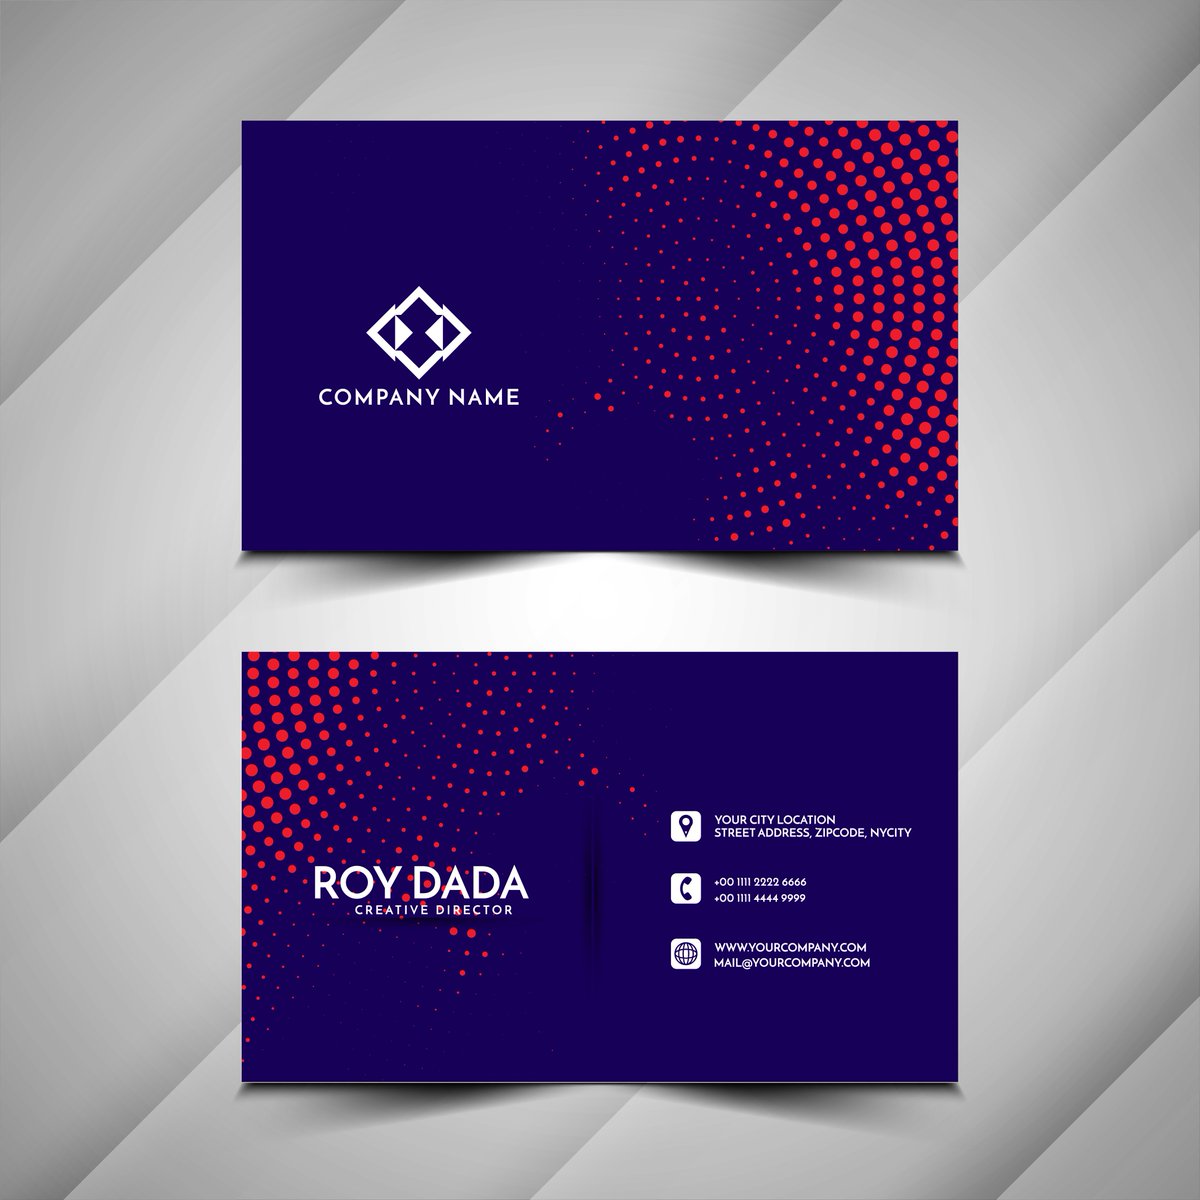 🌟 Exciting Announcement! 🌟

Introducing our latest business card design that's guaranteed to leave a lasting impression! 💼✨
#BusinessCards #ProfessionalDesign #StandOut #ElevateYourBrand #MakeAnImpression #TopQuality #BusinessCardGoals #NetworkingGameChanger #Success